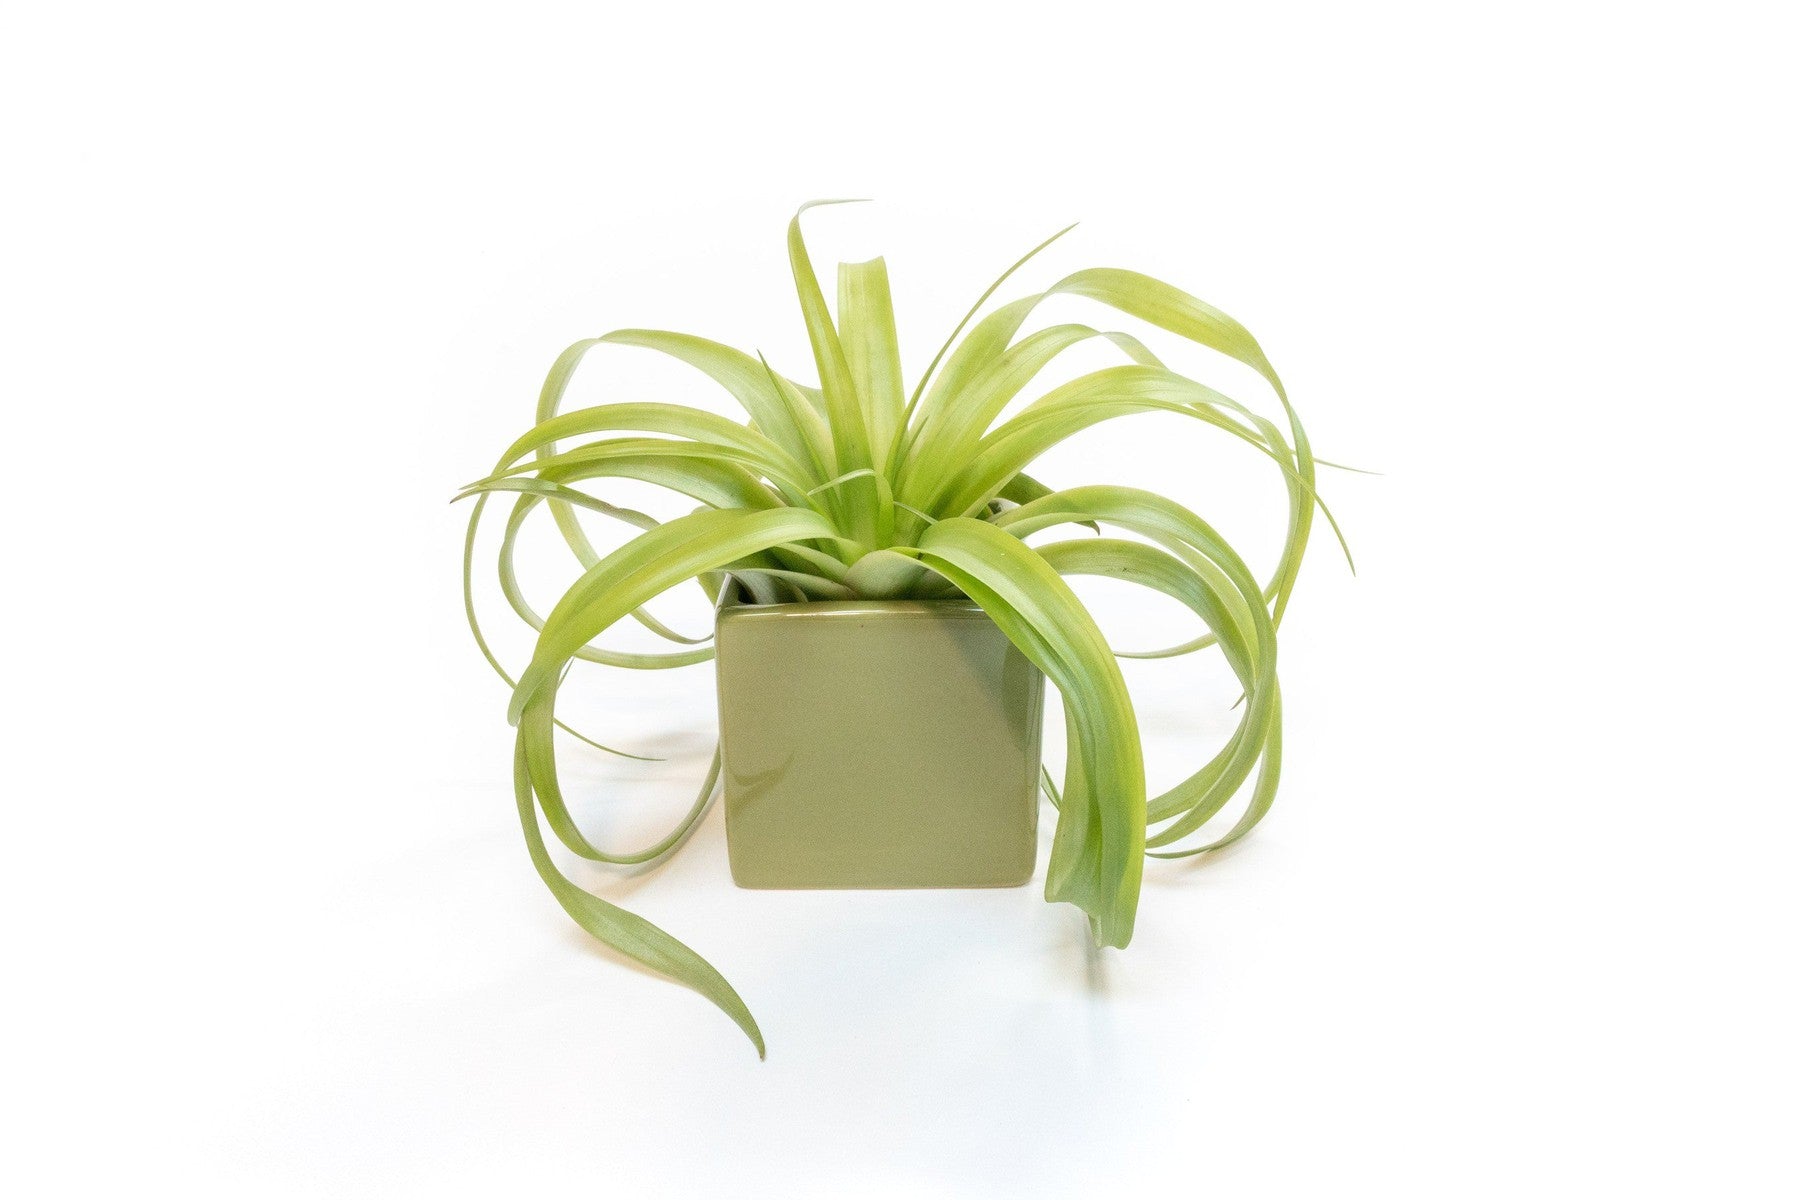 Avocado Green Ceramic Cube Container with Assorted Large Tillandsia Air Plant-The Succulent Source